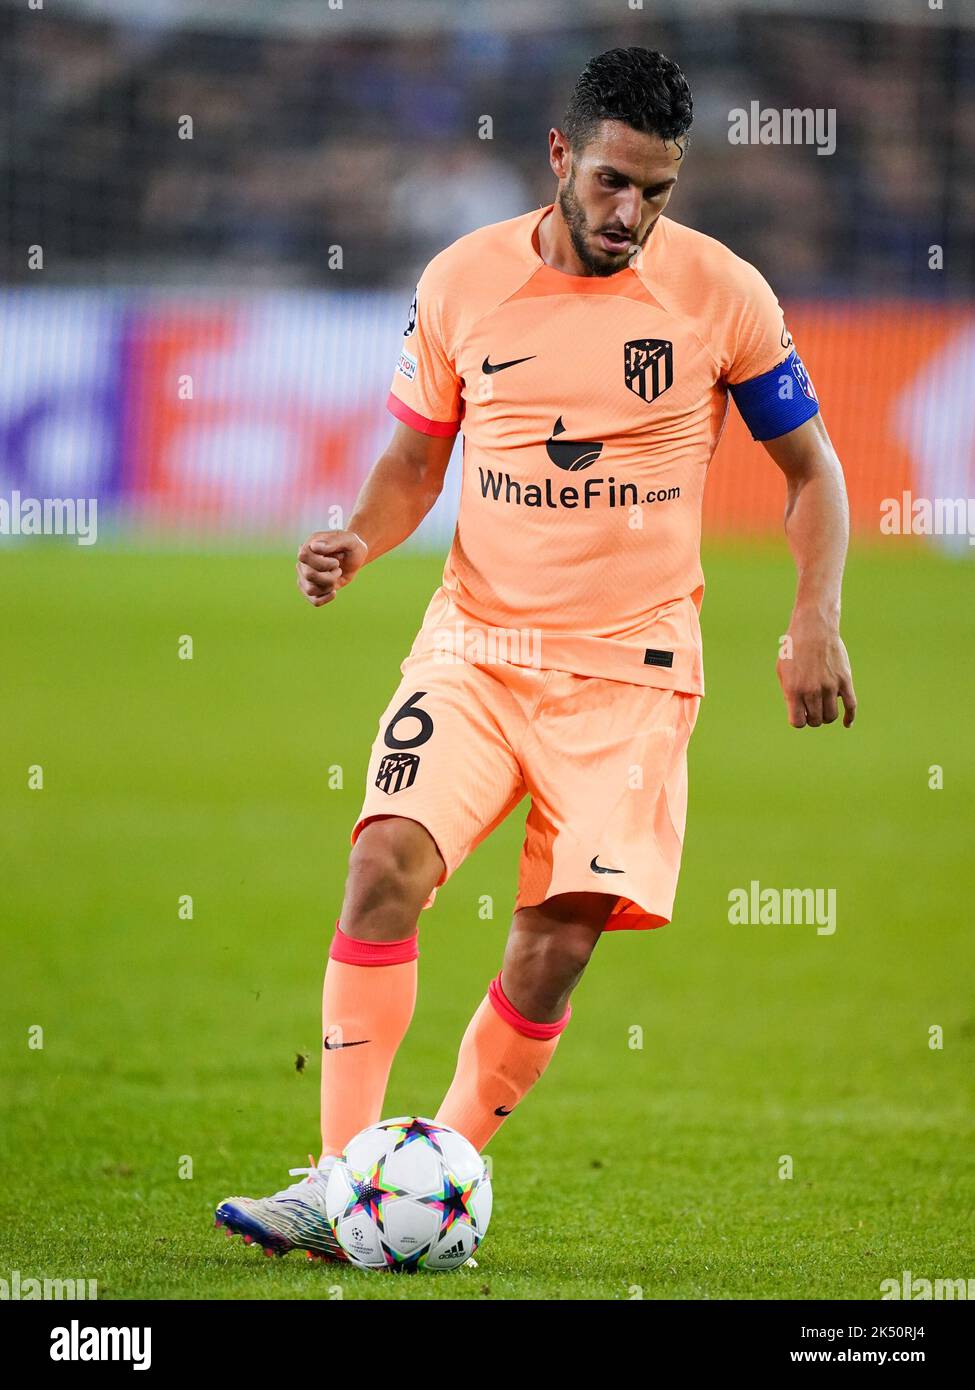 BRUGGES, BELGIUM - OCTOBER 4: Koke of Atletico Madrid runs with the ball during the Group B - UEFA Champions League match between Club Brugge KV and Atletico Madrid at the Jan Breydelstadion on October 4, 2022 in Brugges, Belgium (Photo by Joris Verwijst/Orange Pictures) Stock Photo